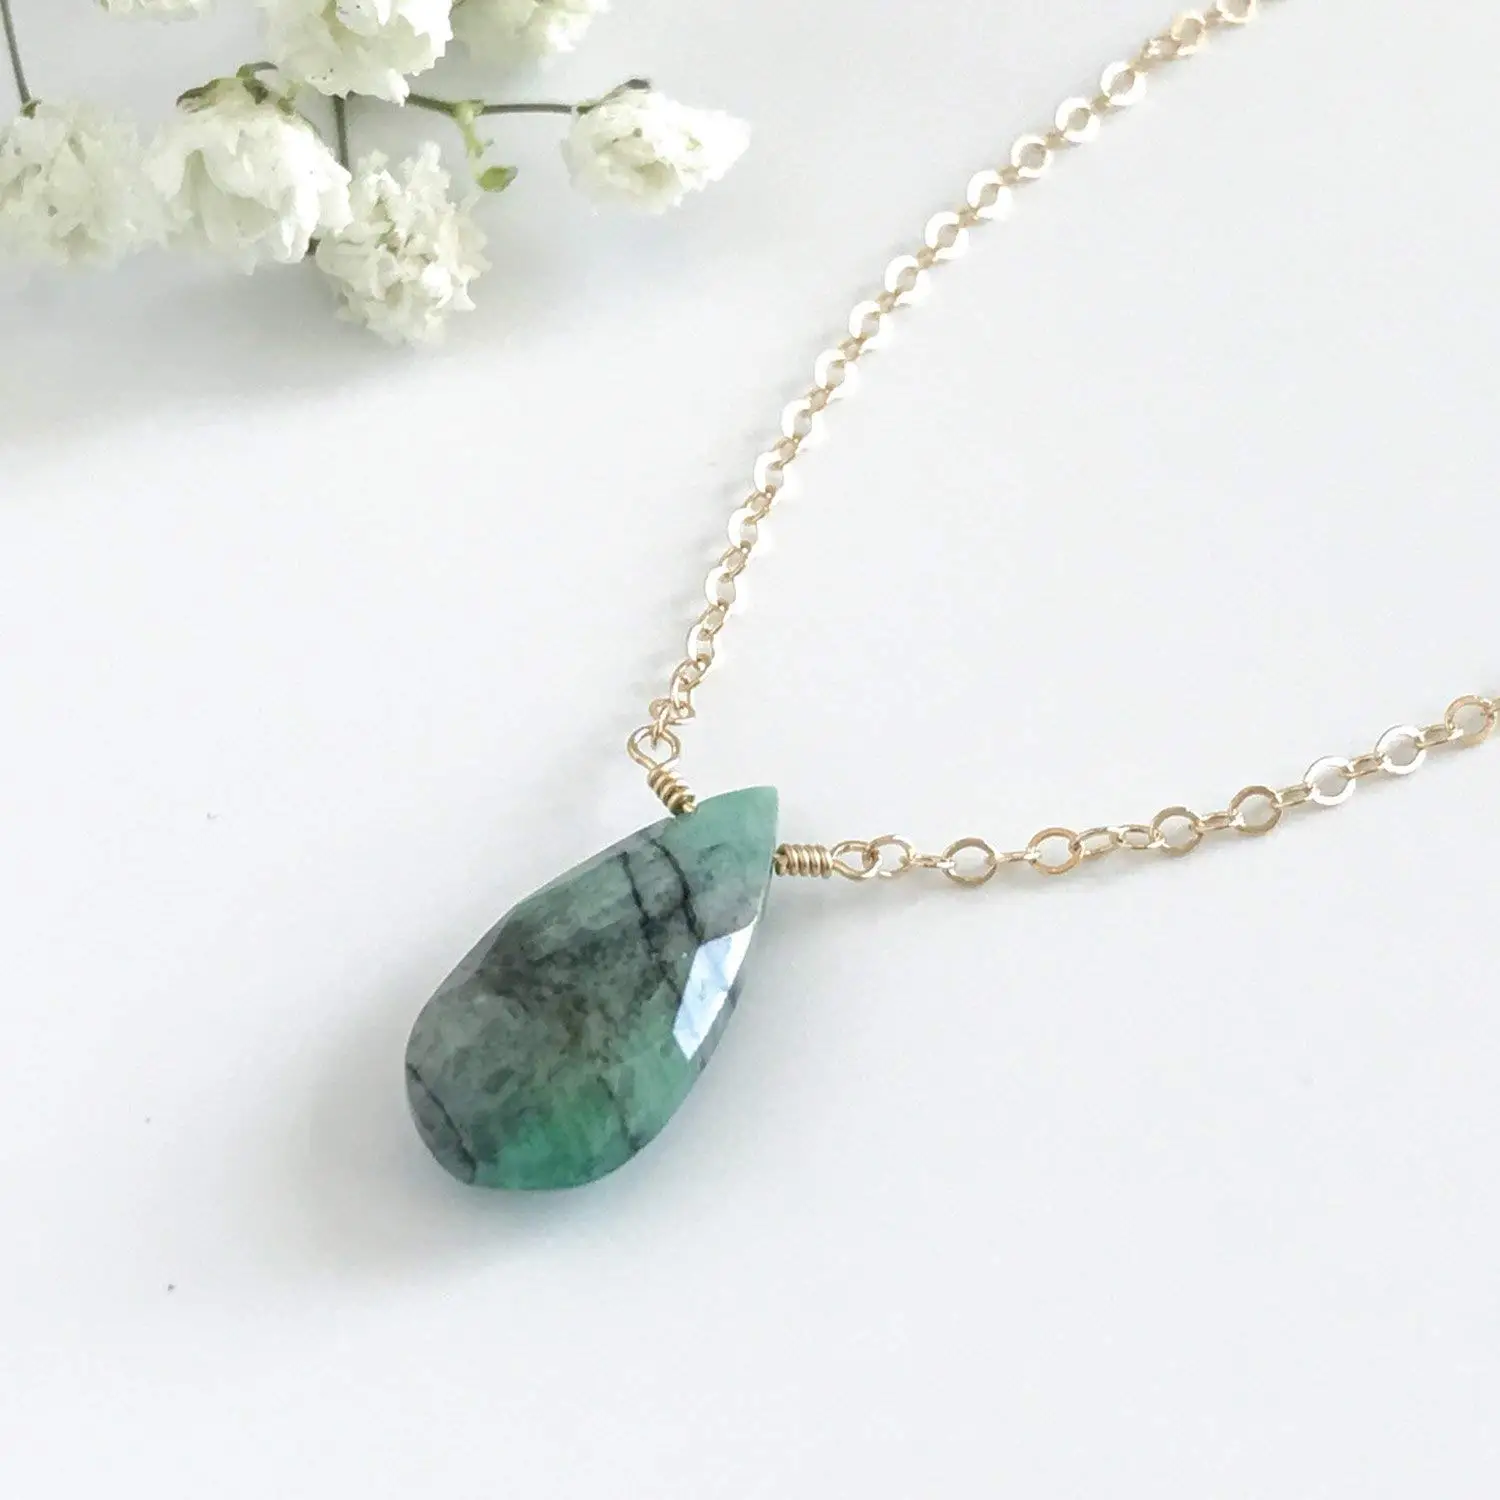 Cheap Raw Emerald Necklace, find Raw Emerald Necklace deals on line at